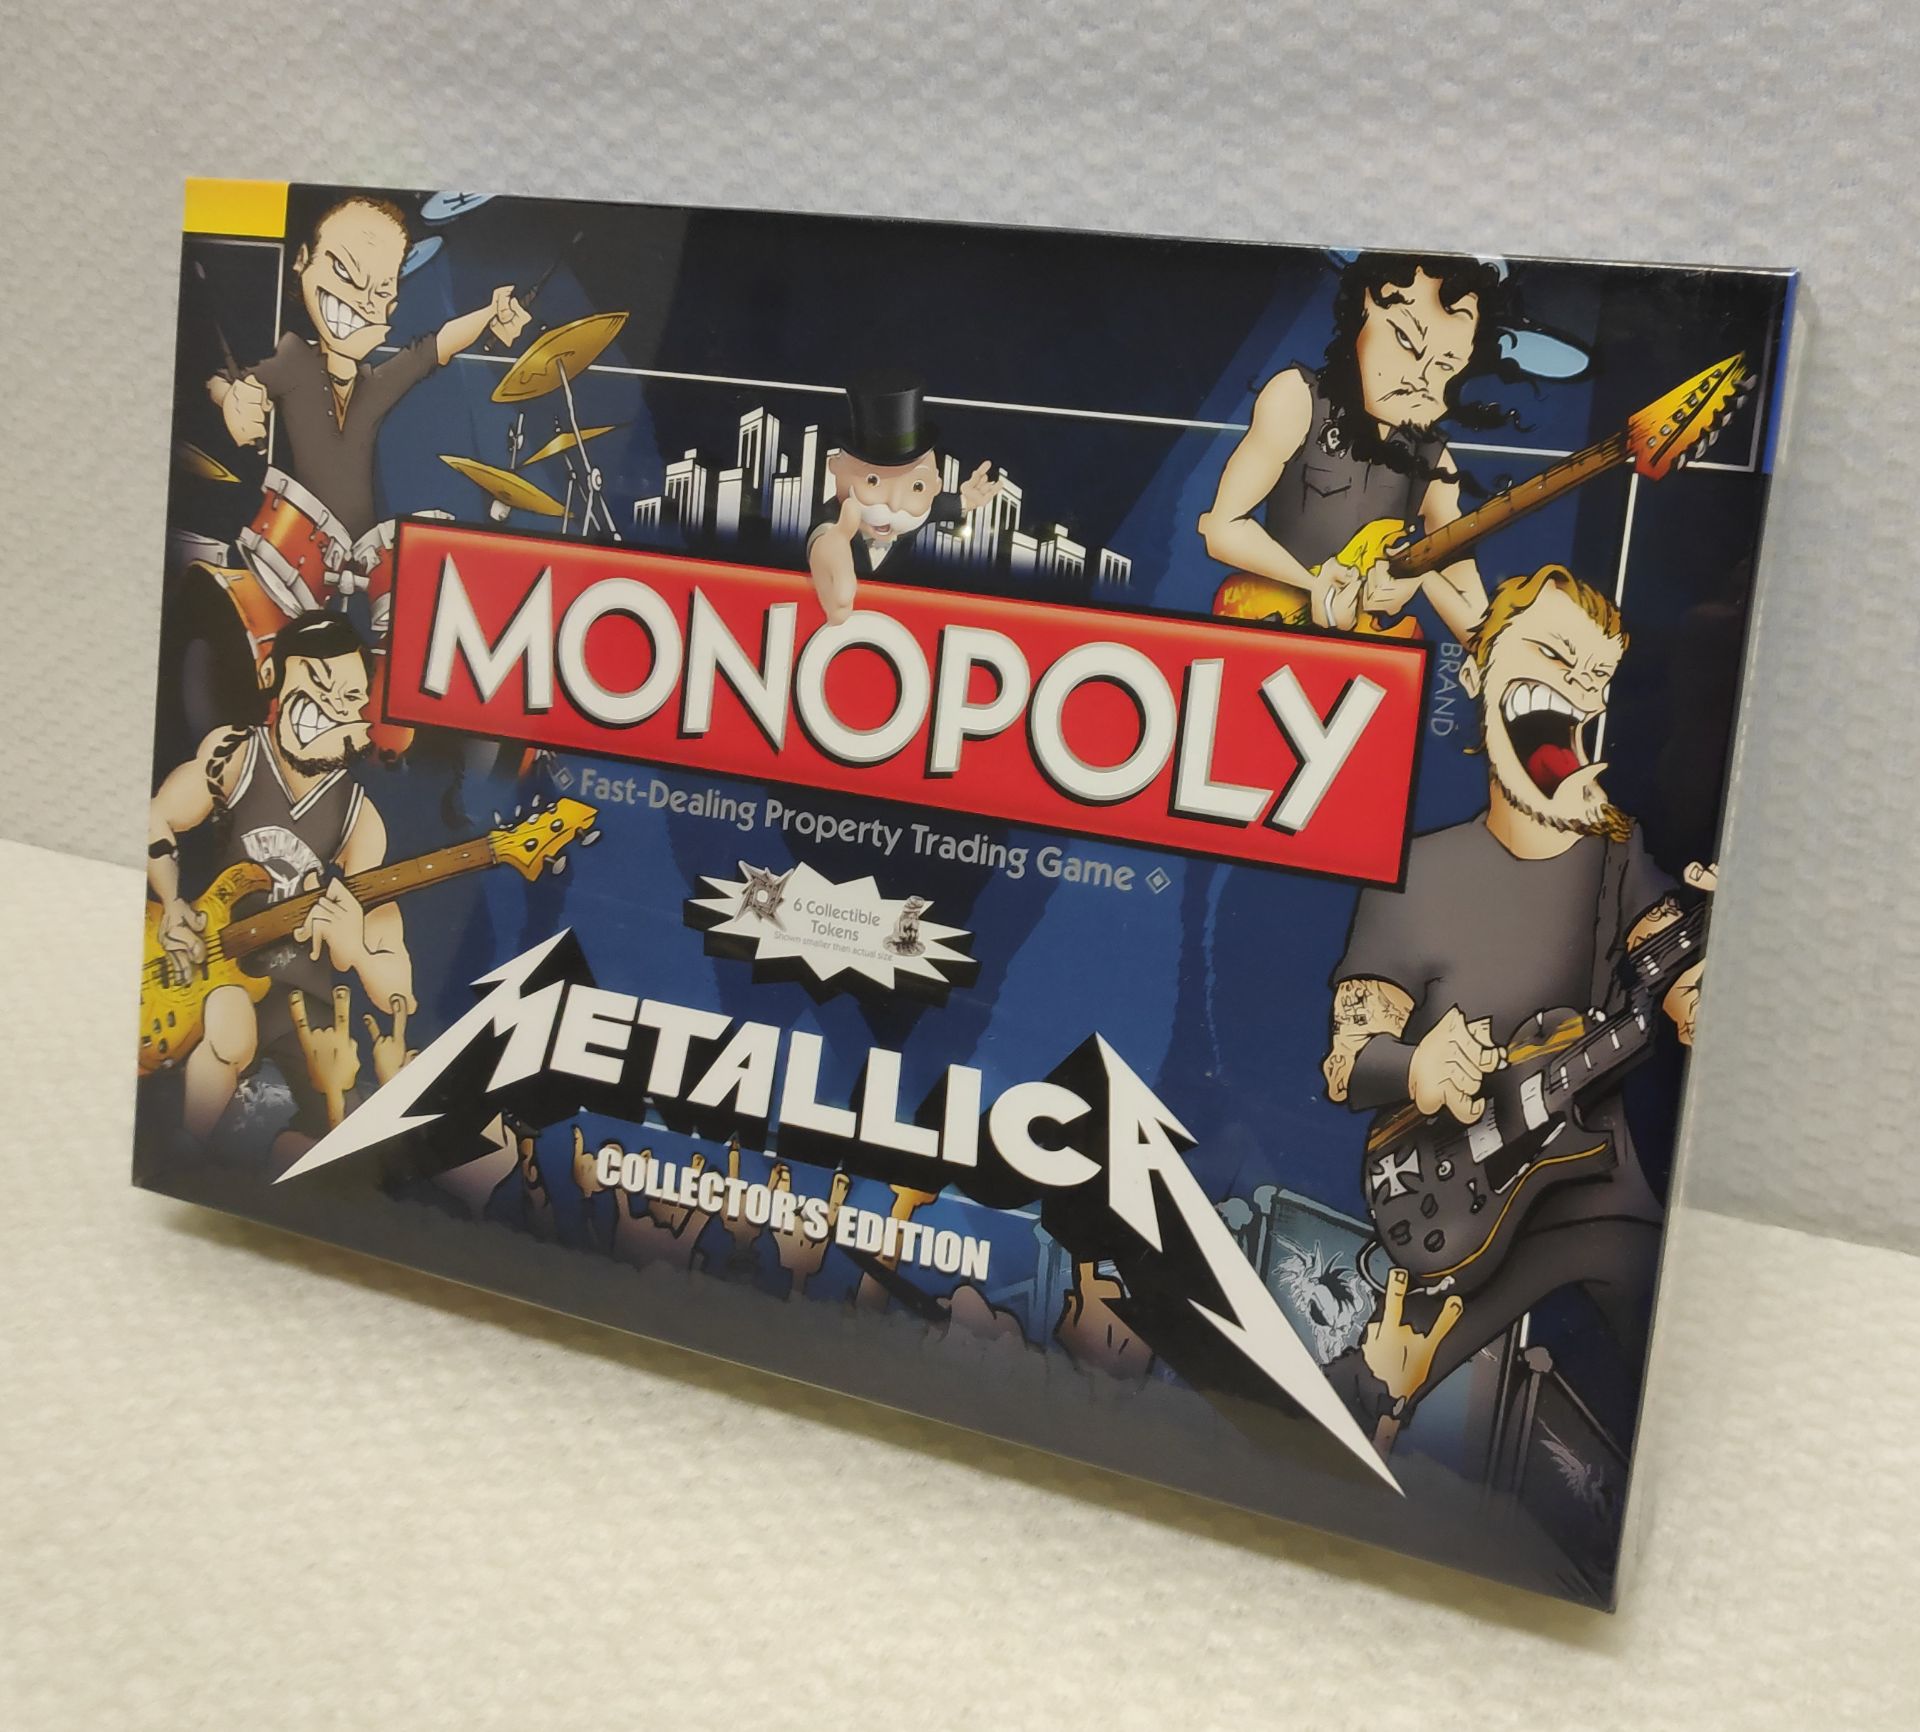 1 x Metallica Collector's Edition Monopoly - New/Sealed - Image 4 of 8